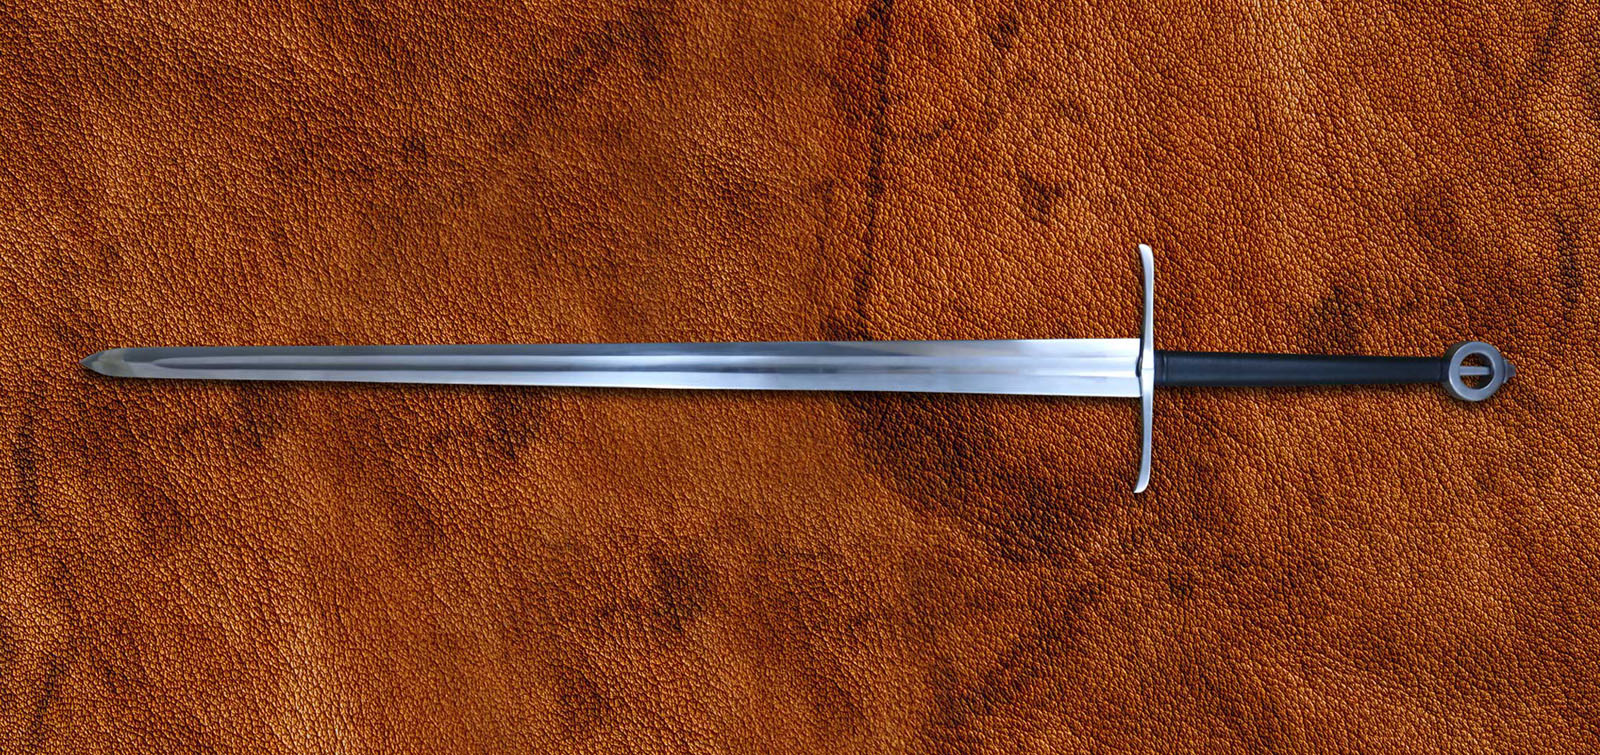 Game of Thrones - The High King Sword